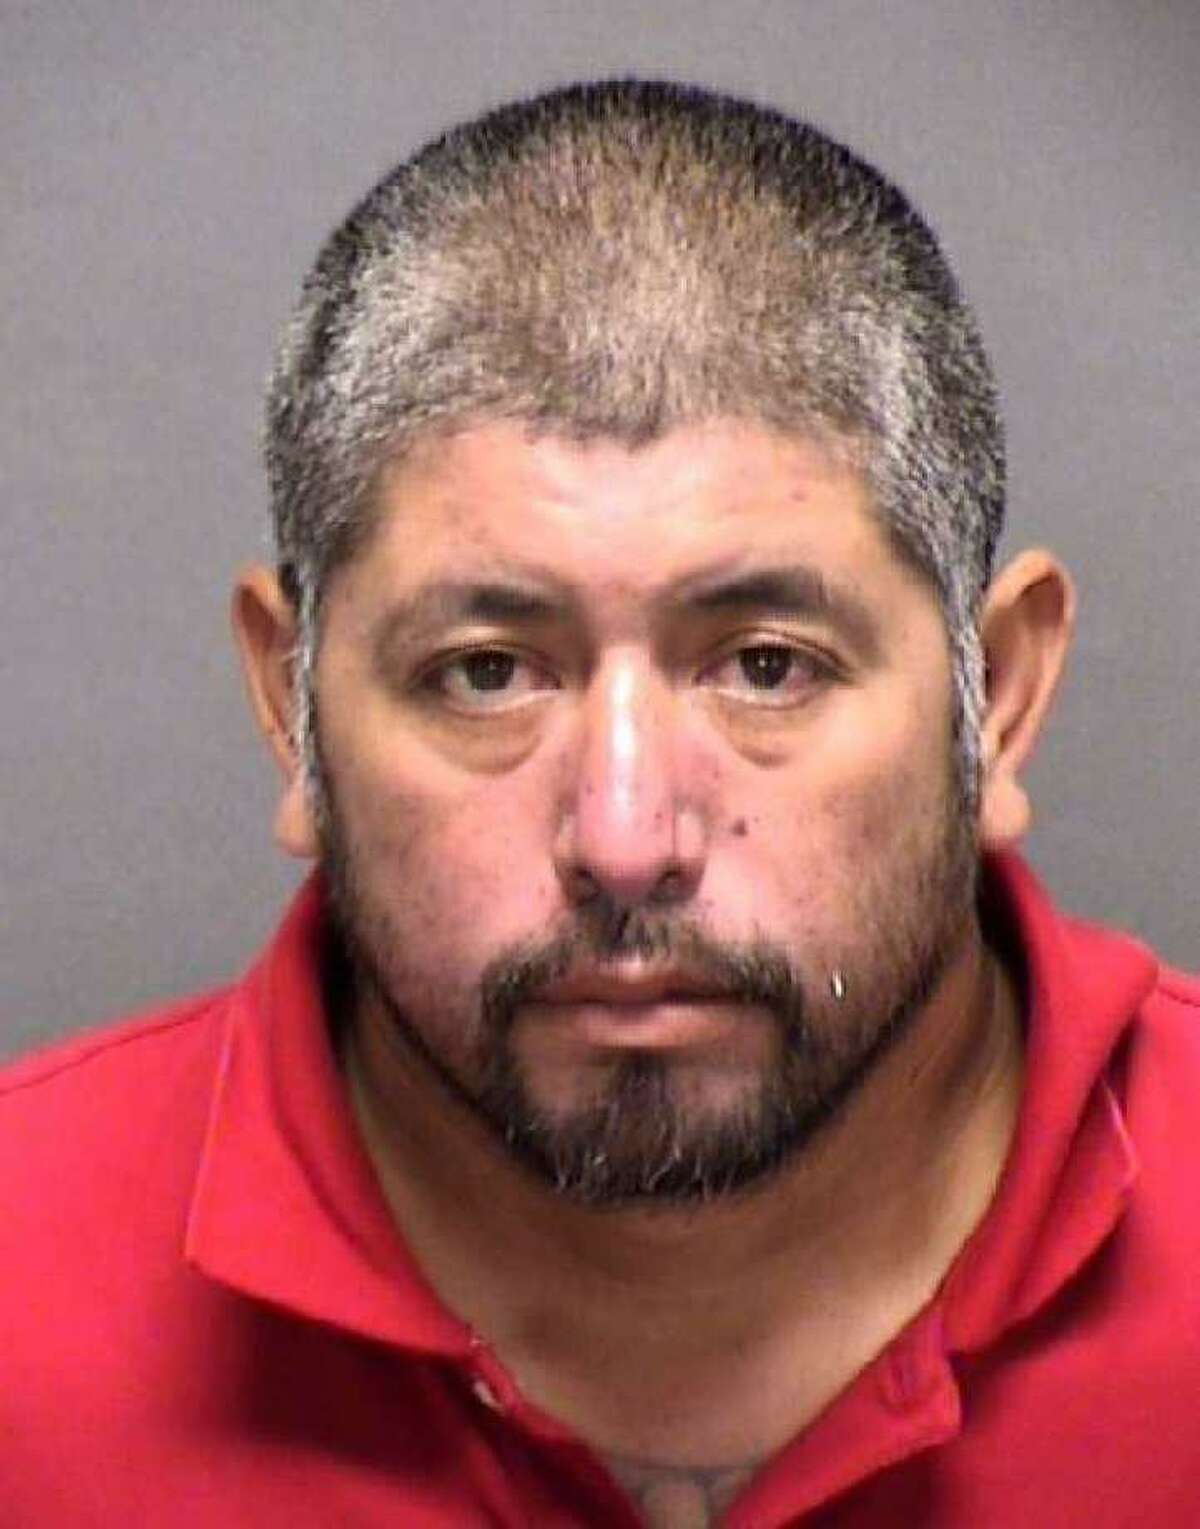 Andrew Munoz, 42, is wanted in connection with his ex-girlfriend’s killing. Police ask anyone with information about his whereabouts to call 911.